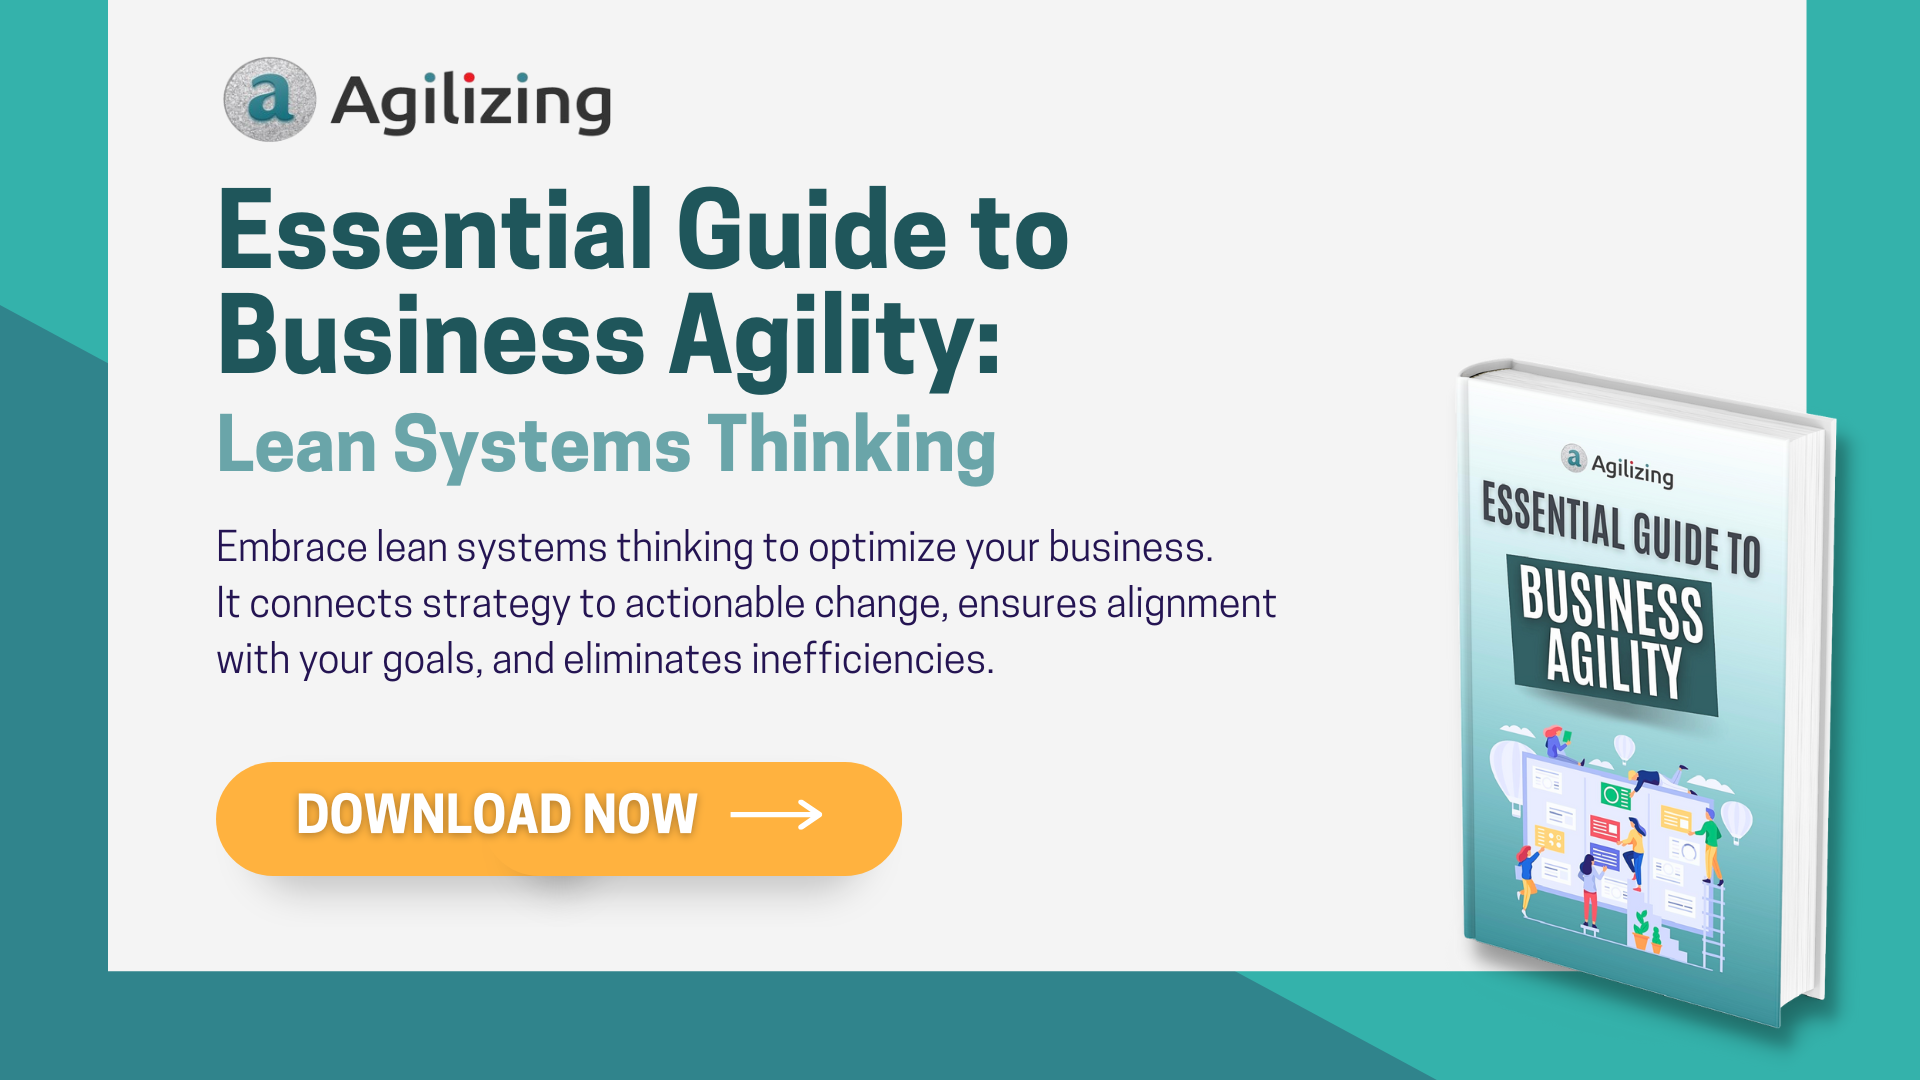 Essential Guide to Business Agility_P.13_ENG_Agilizing